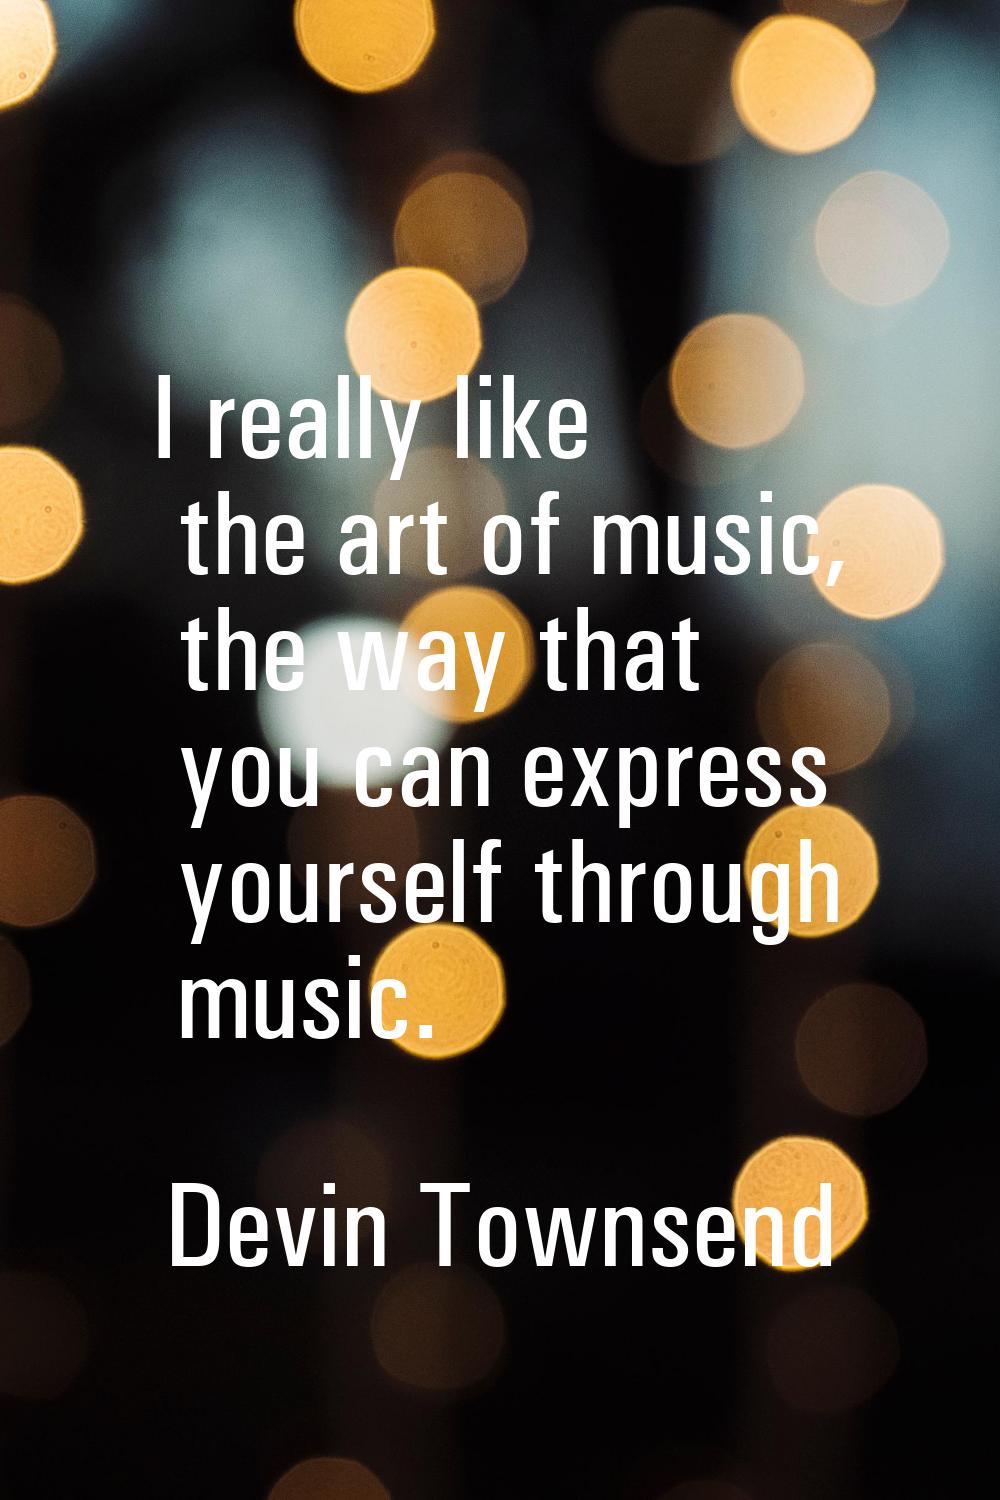 I really like the art of music, the way that you can express yourself through music.